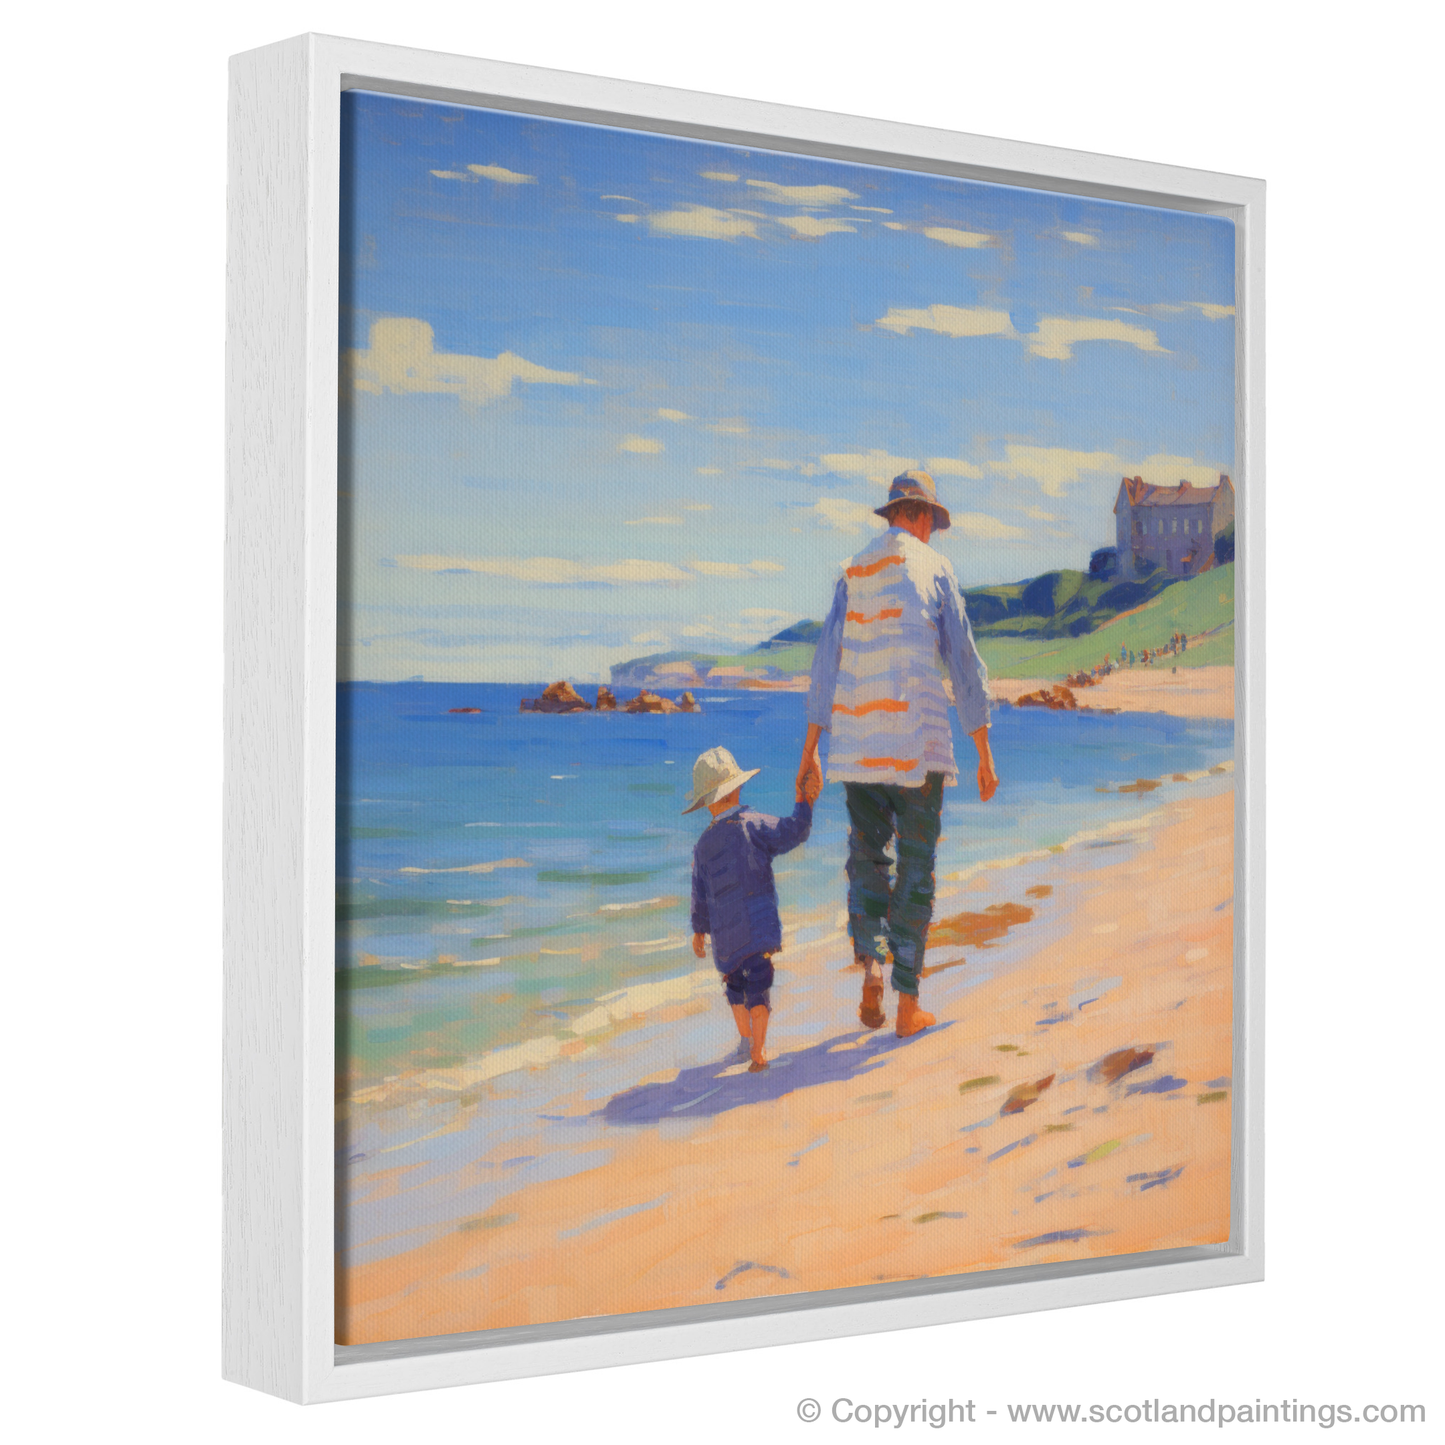 Painting and Art Print of A dad and son walking on Coldingham Bay entitled "Strolling Hand in Hand: A Coldingham Bay Memory".